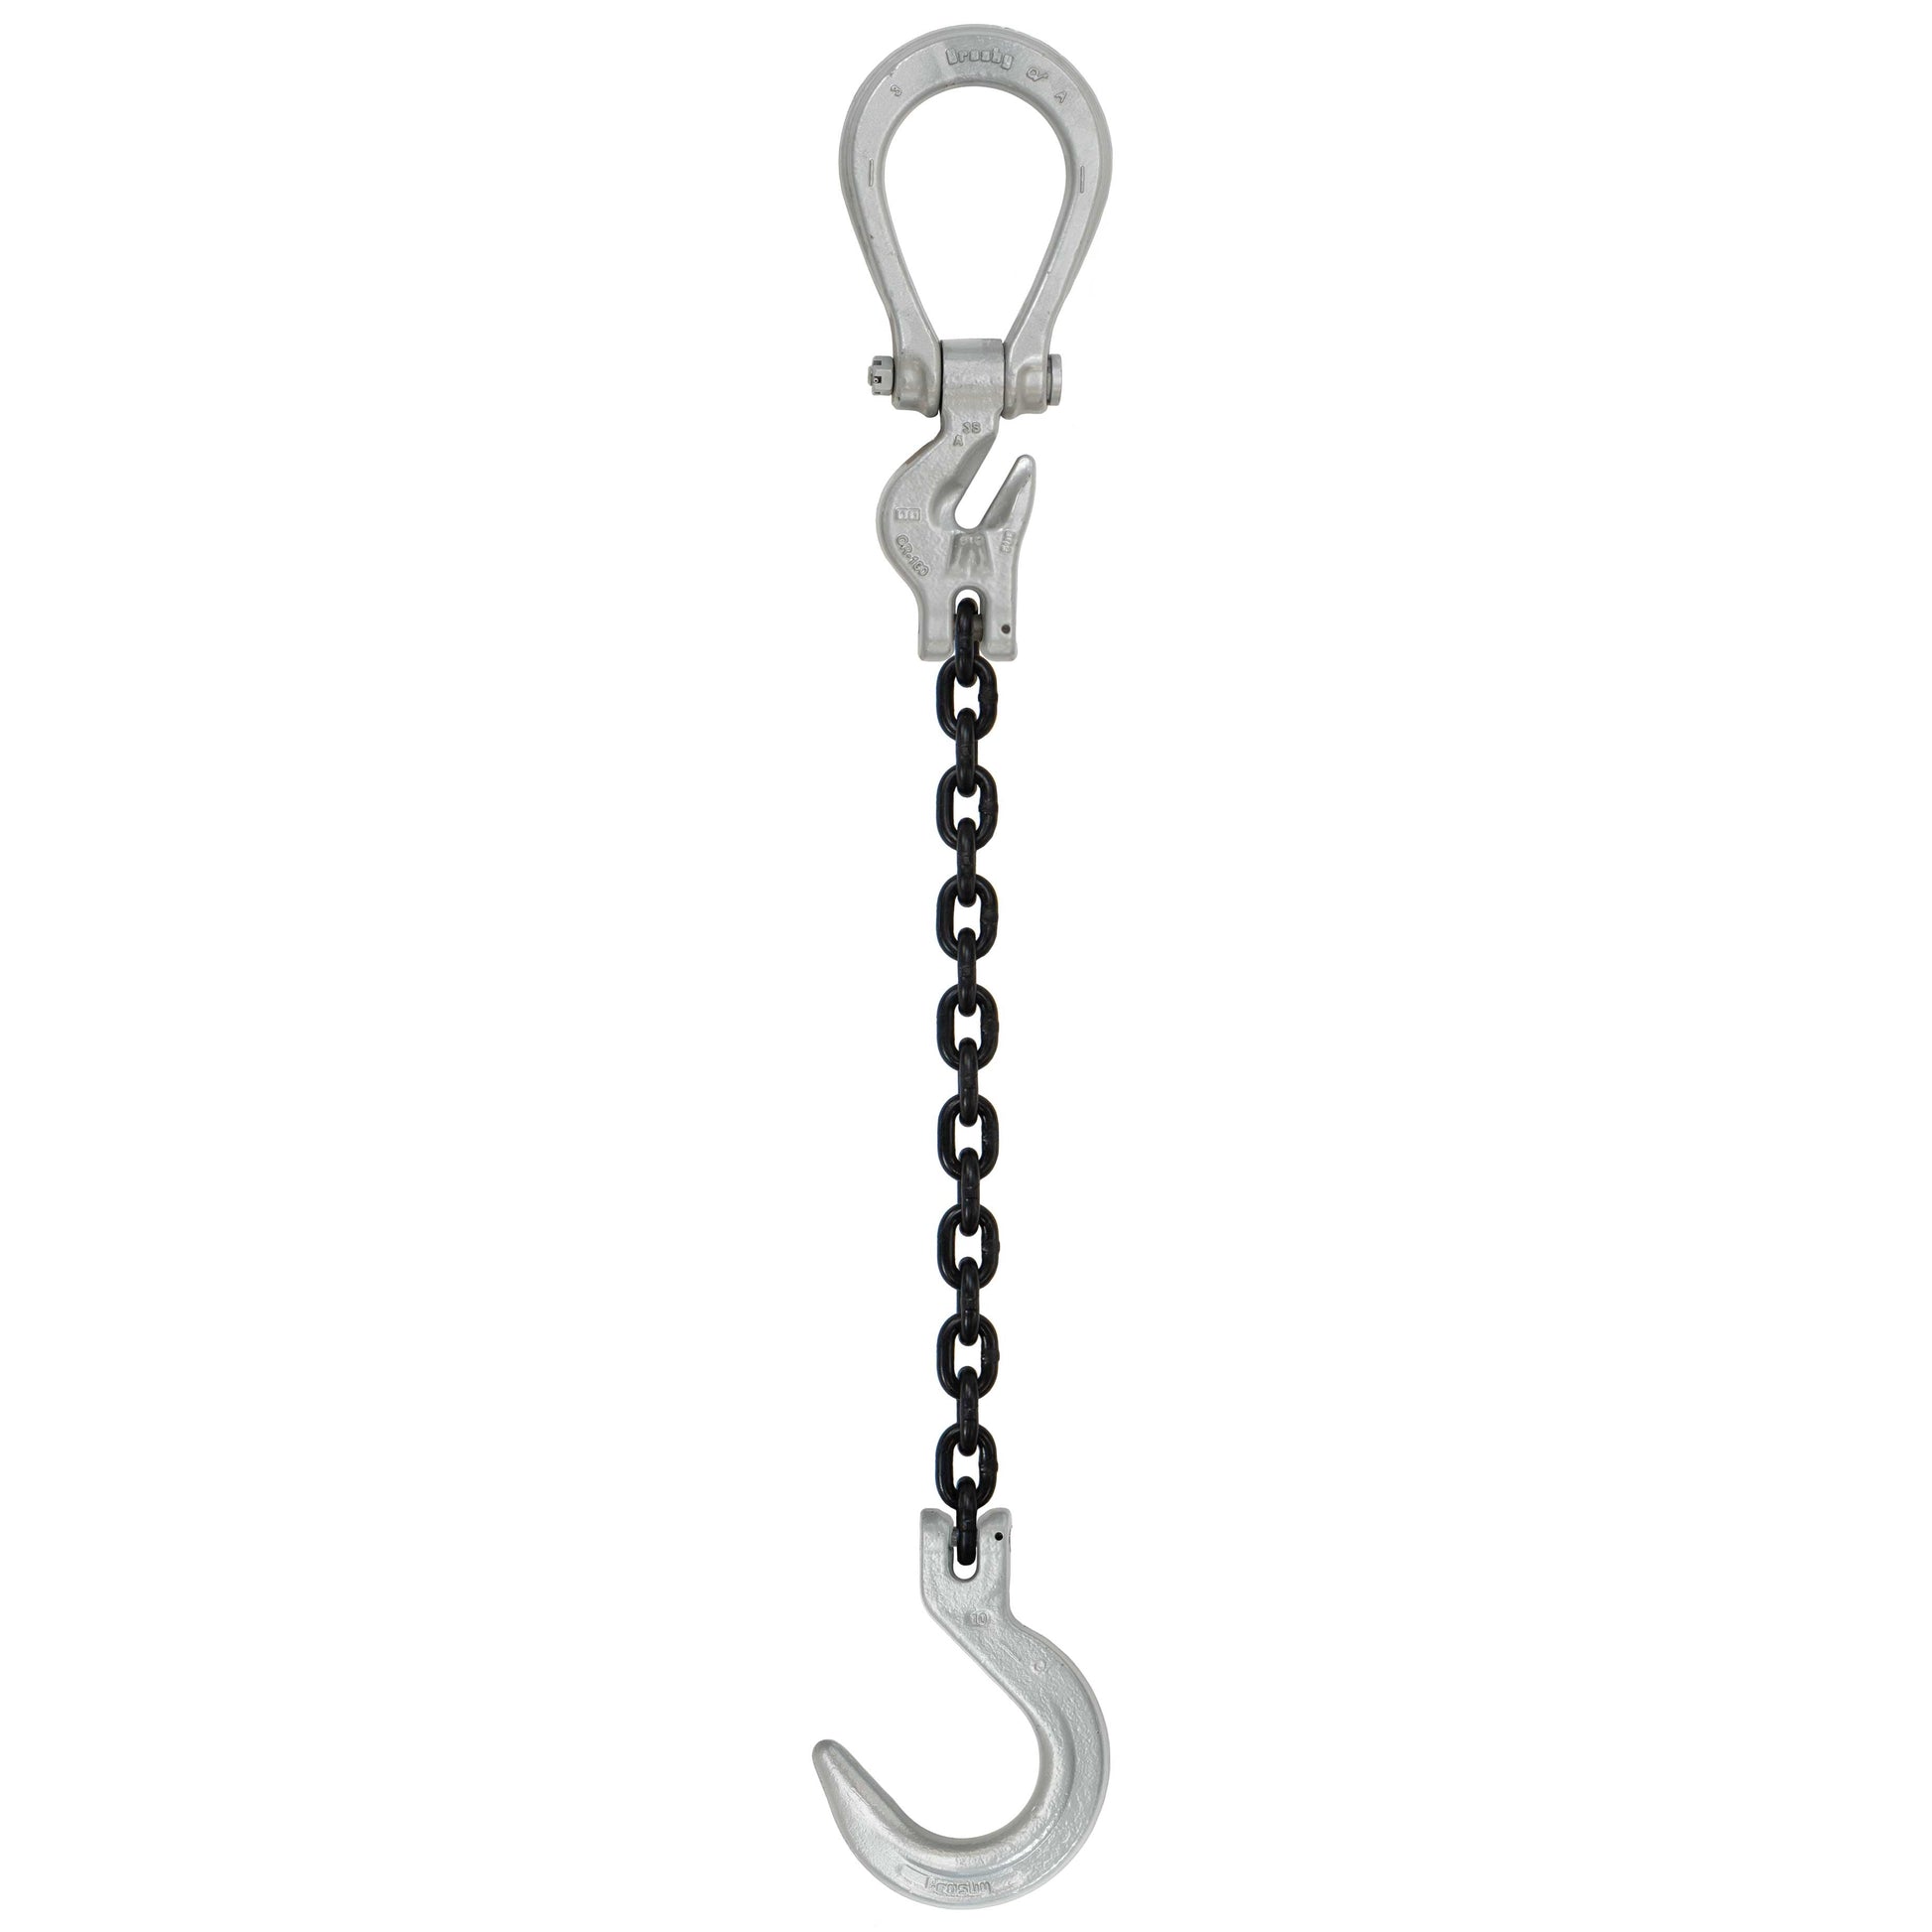 932 inch x 20 foot Domestic Adjustable Single Leg Chain Sling w Crosby Foundry Hook Grade 100 image 1 of 2